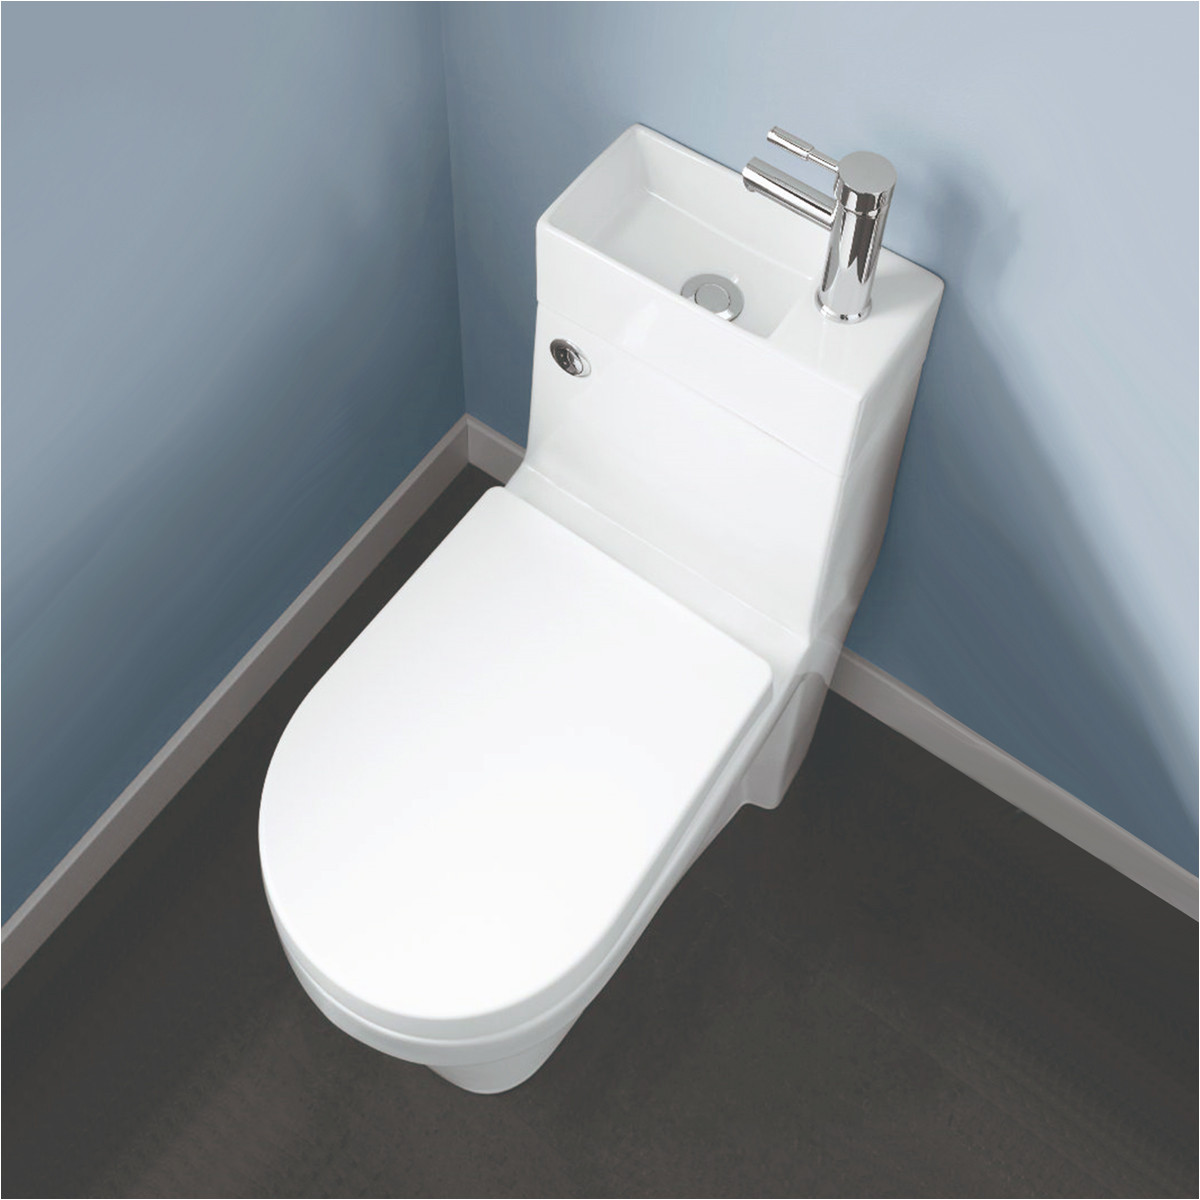 two in one combination close coupled toilet with wash basin combination toilet and sink